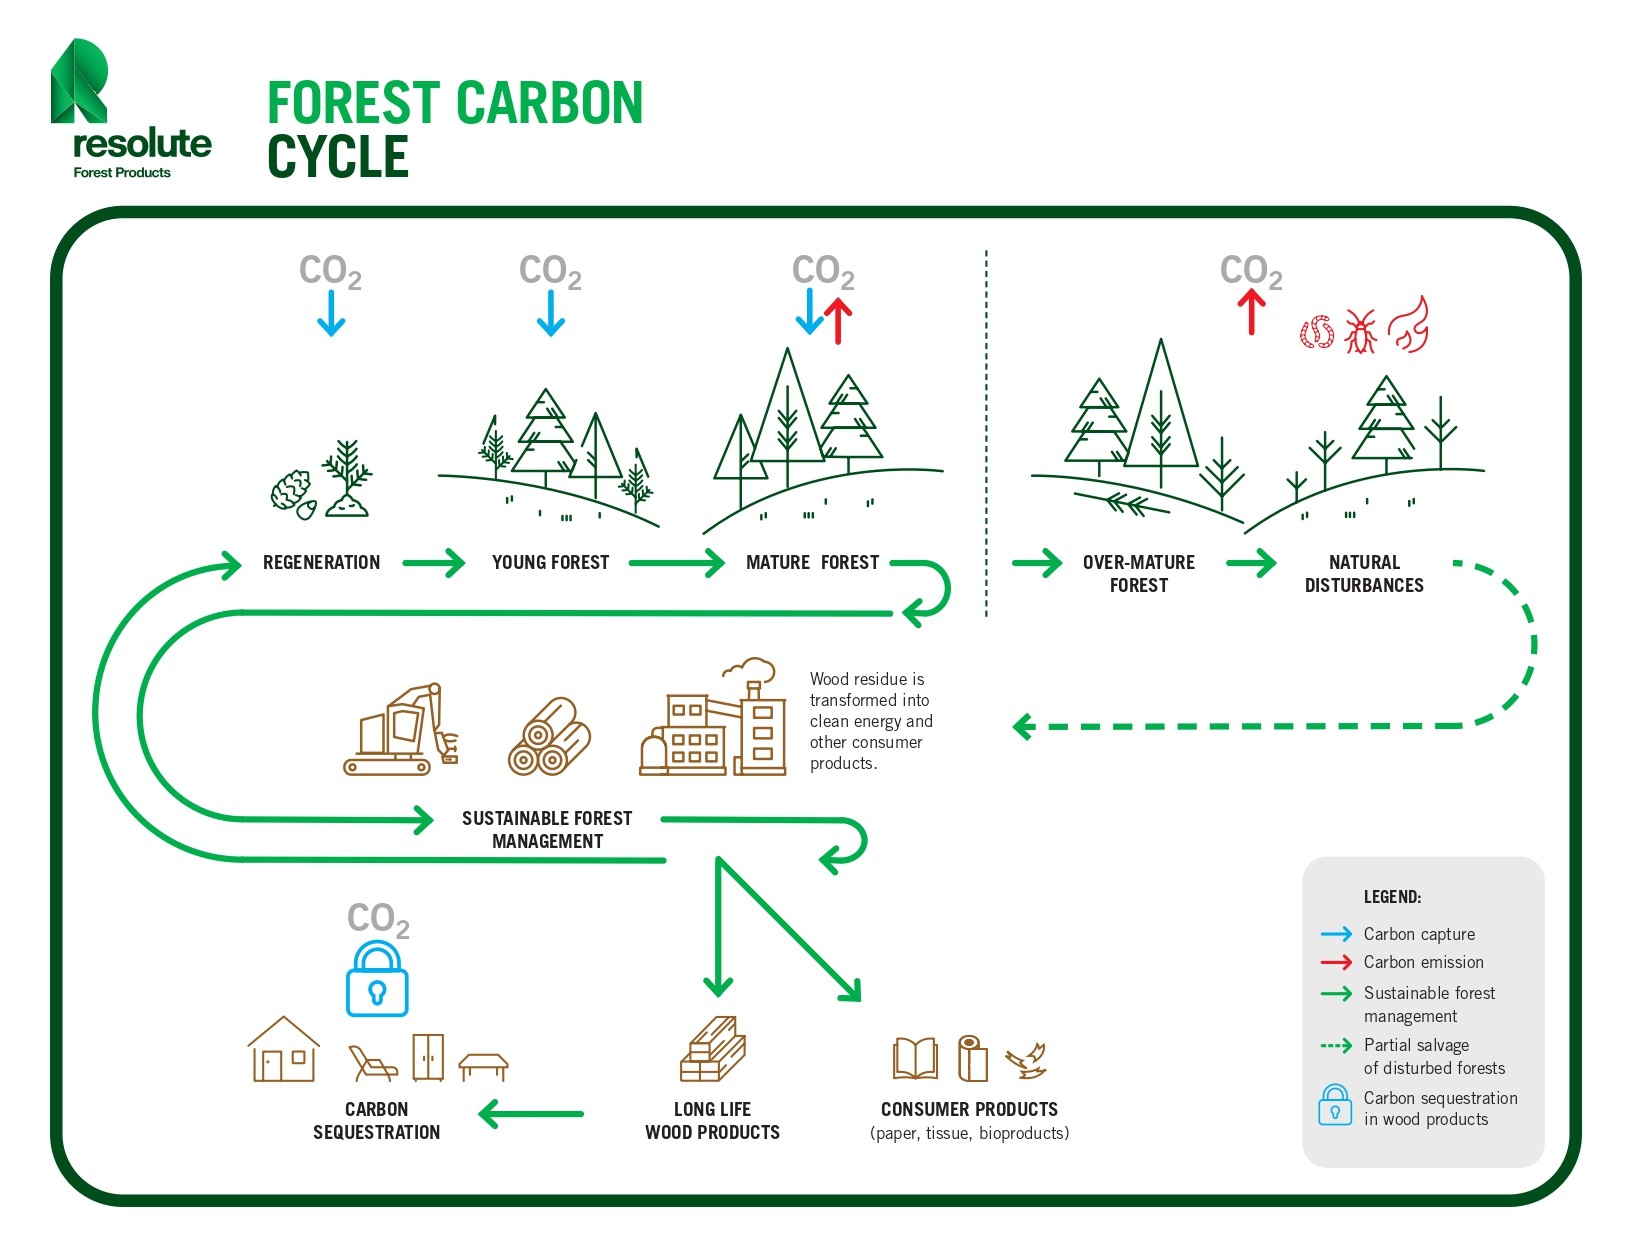 forest carbon cycle is part of cofriendly wood product creation